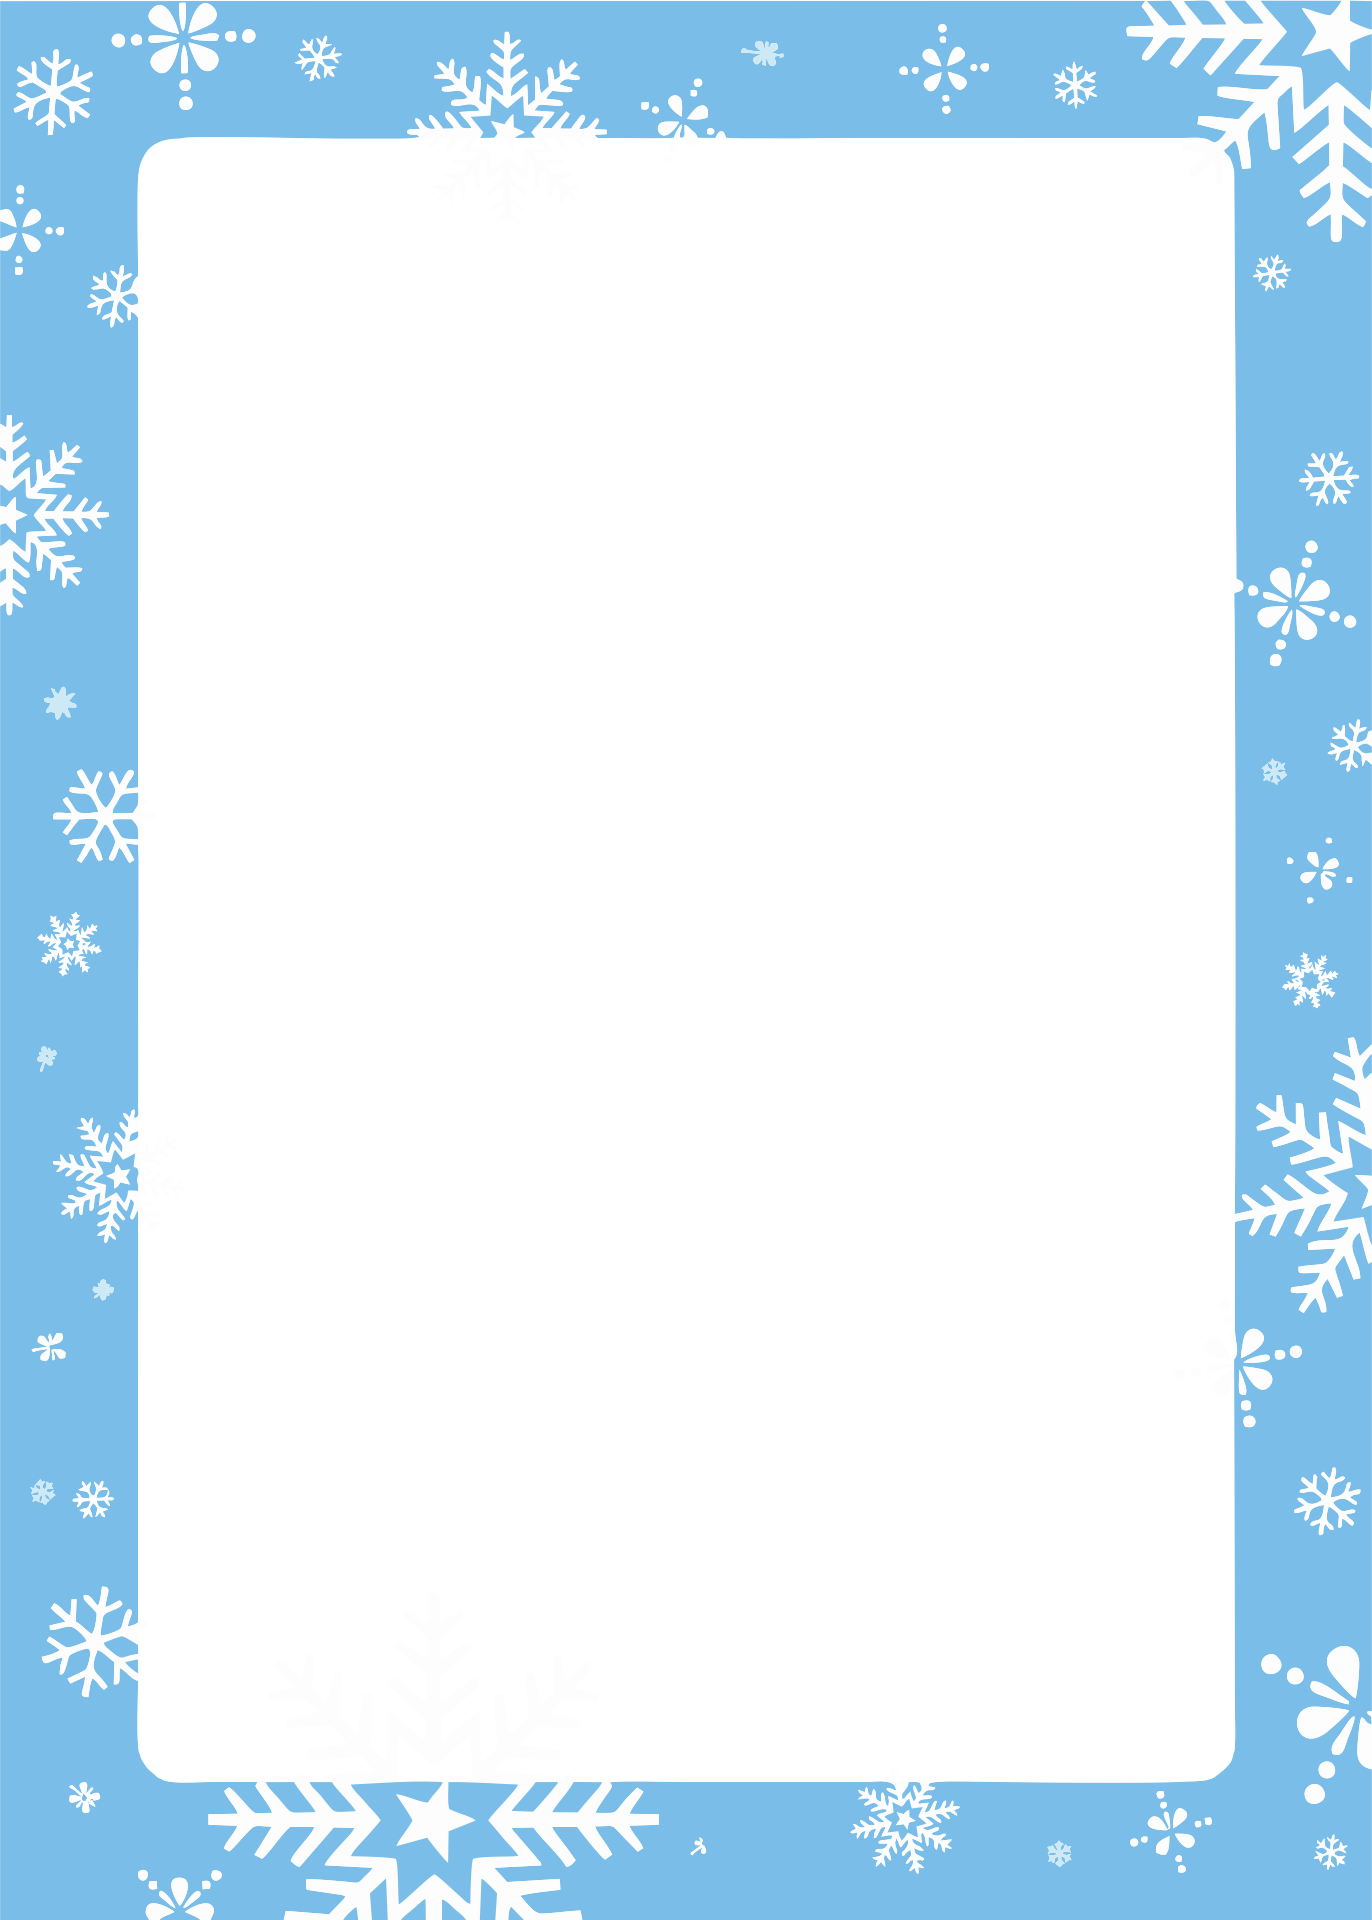 7 Best Images Of Free Winter Printable Borders Free Printable Winter Borders Winter Border 